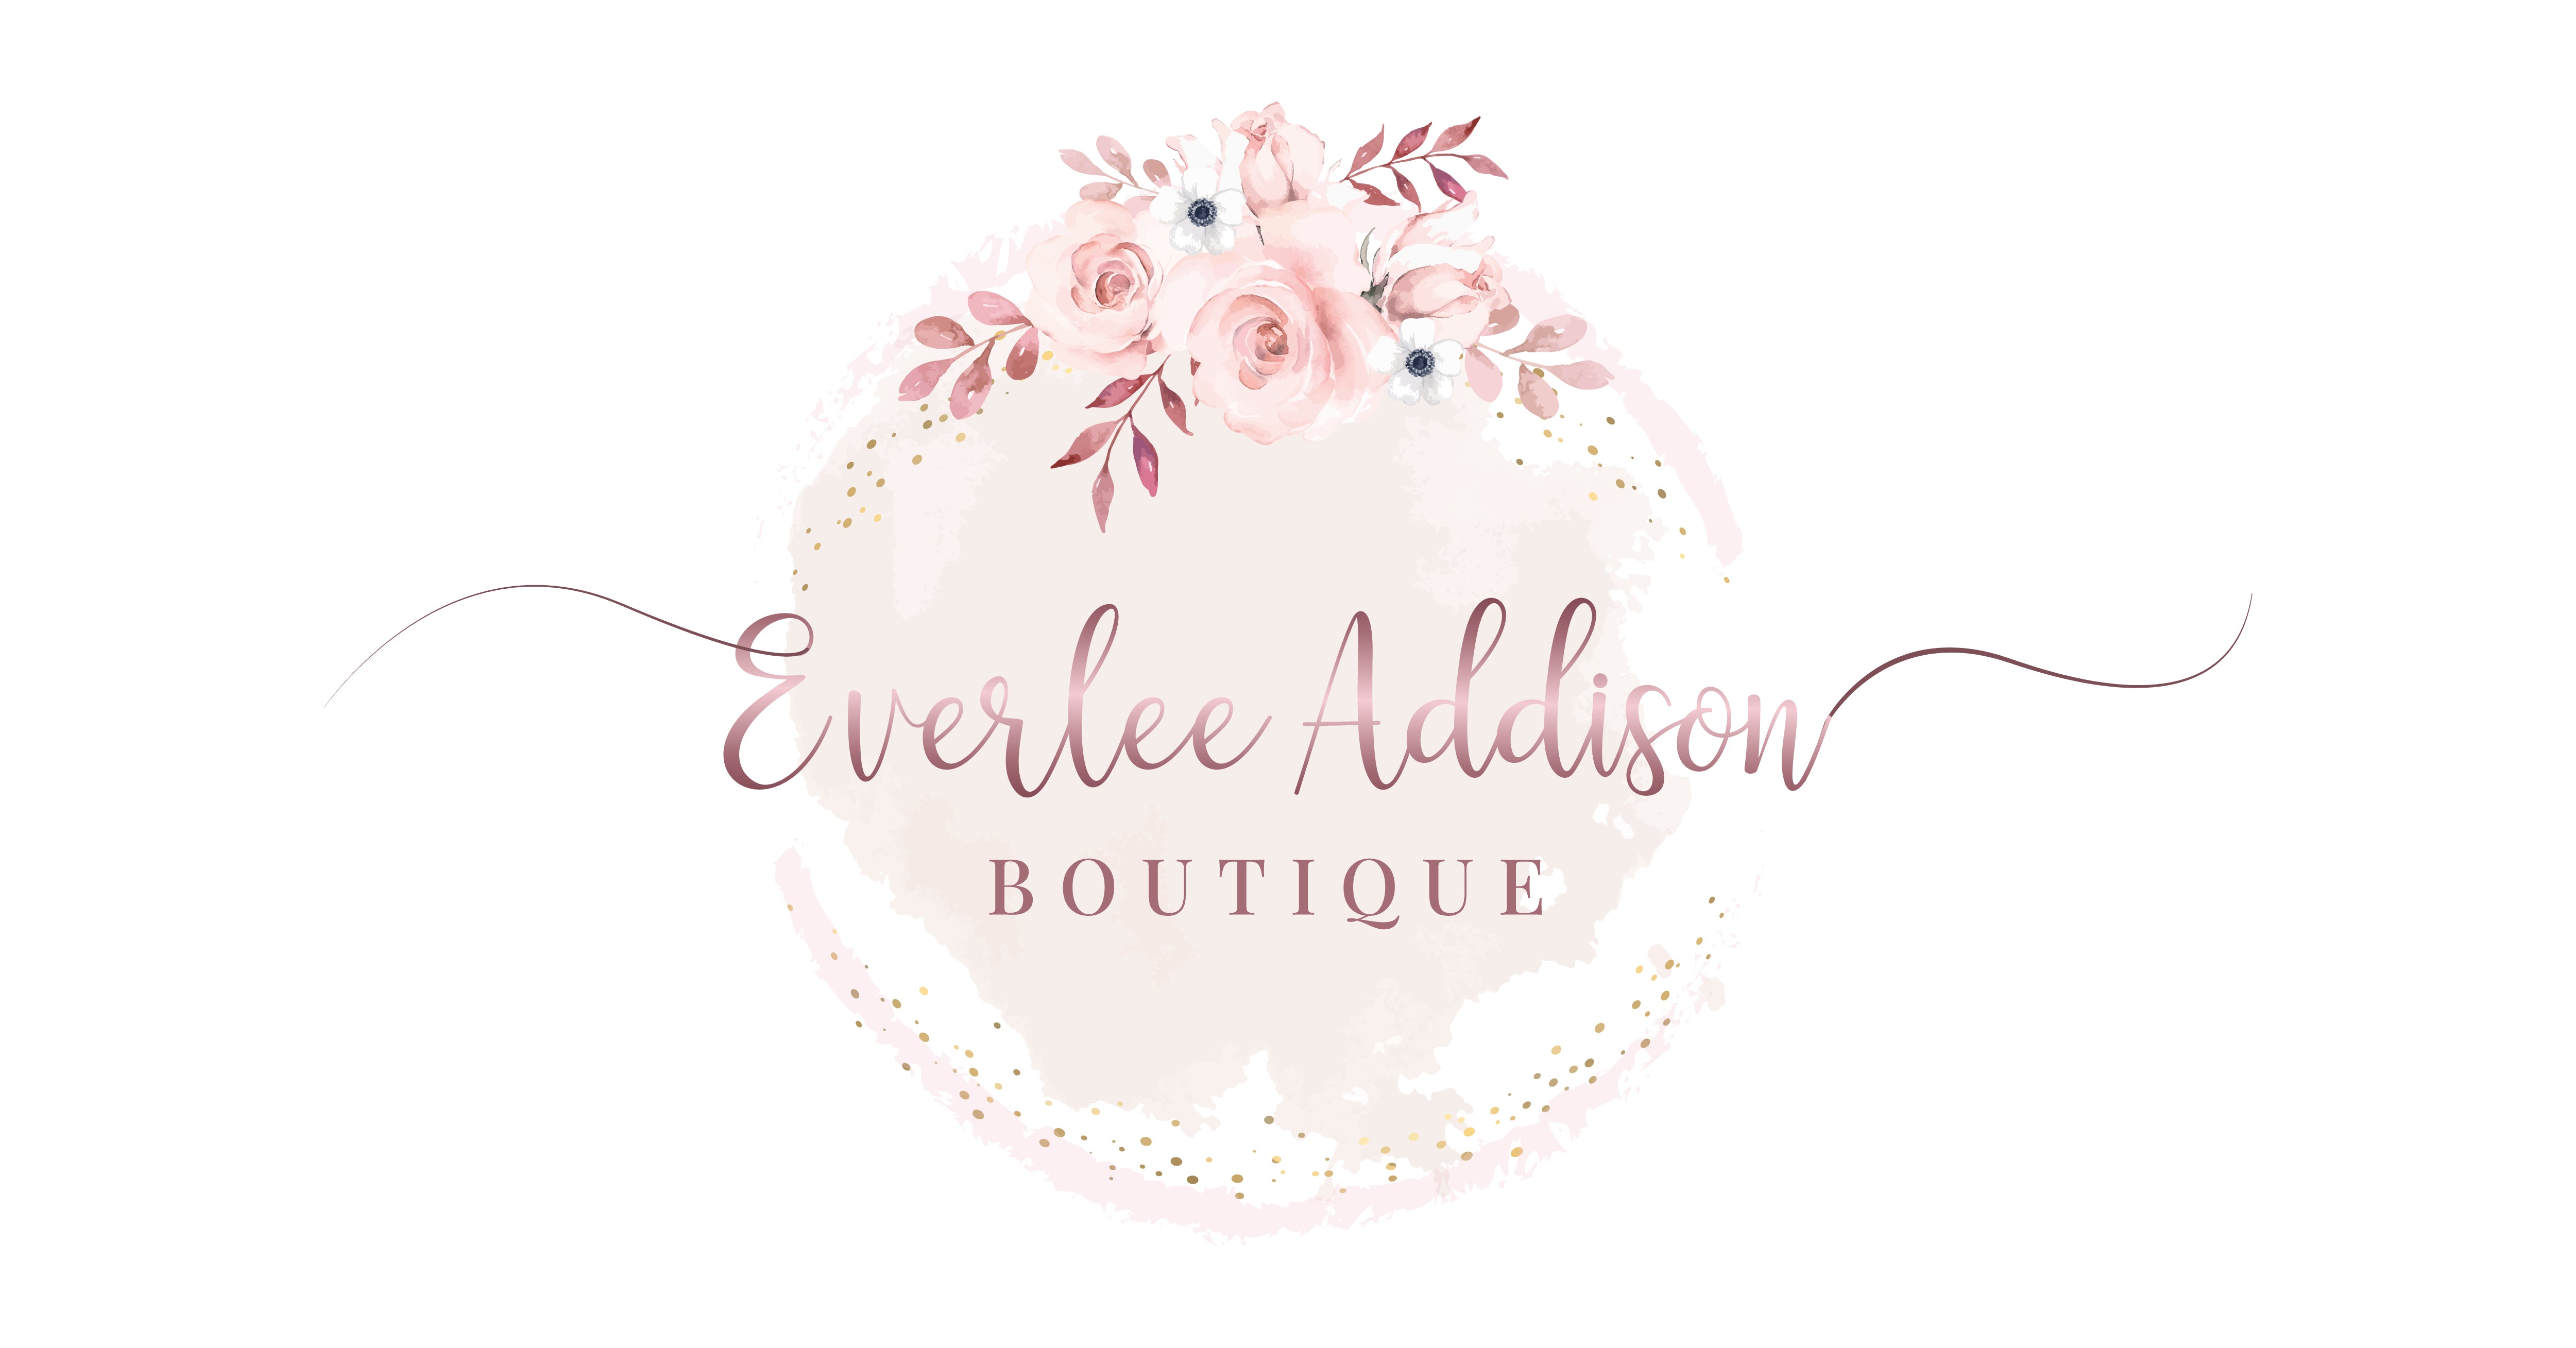 Everlee Addison Boutique – Opening soon